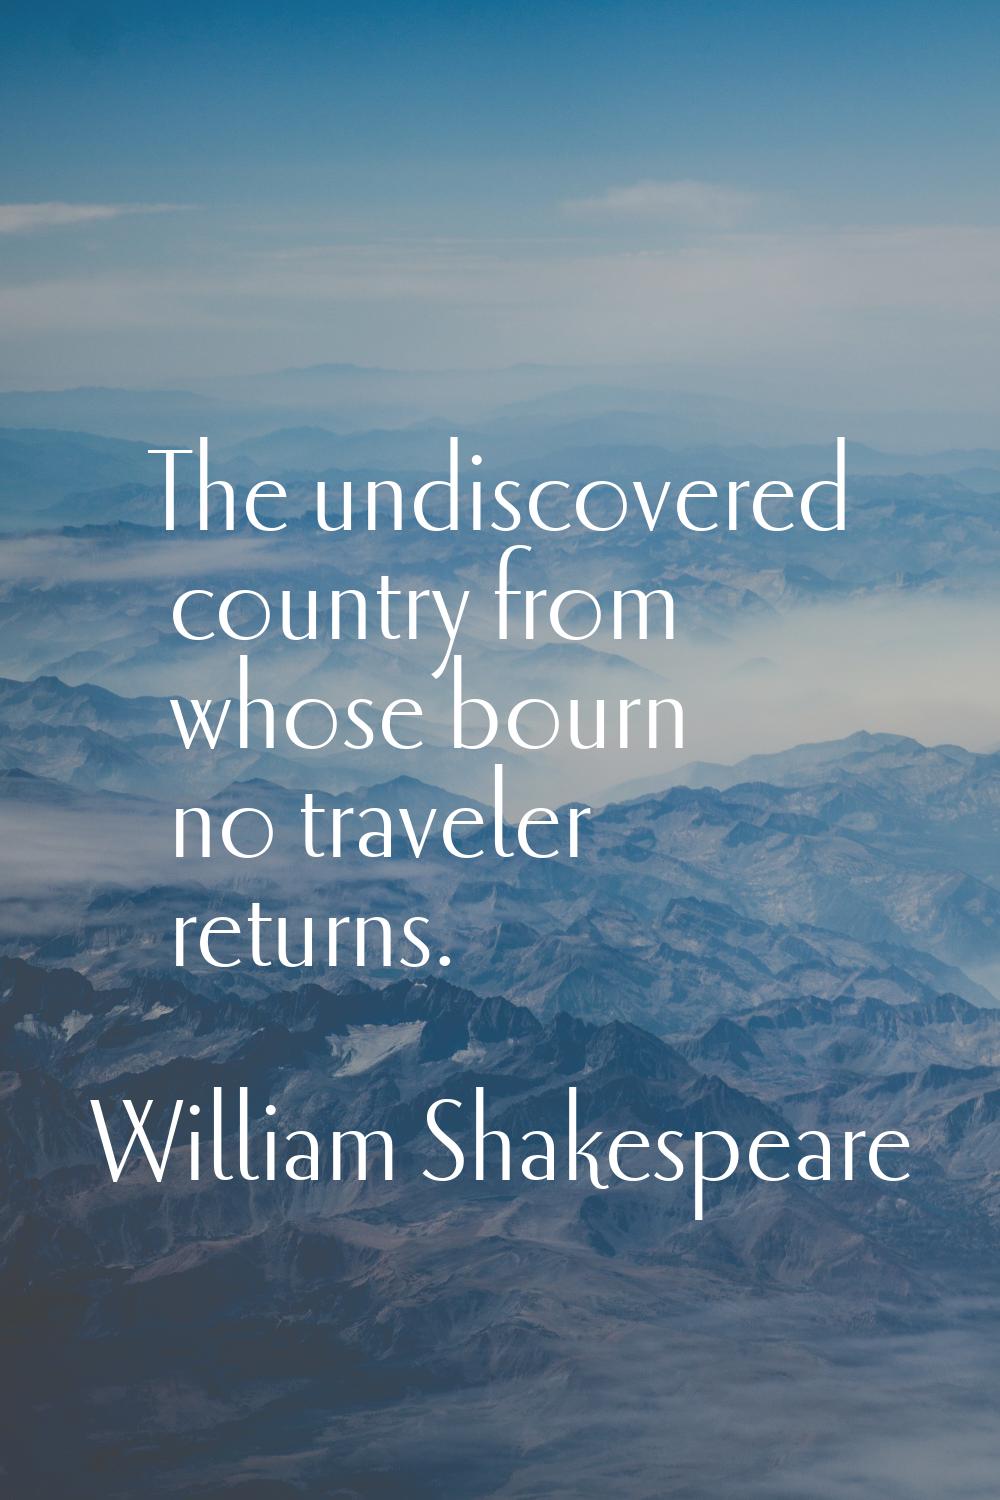 The undiscovered country from whose bourn no traveler returns.